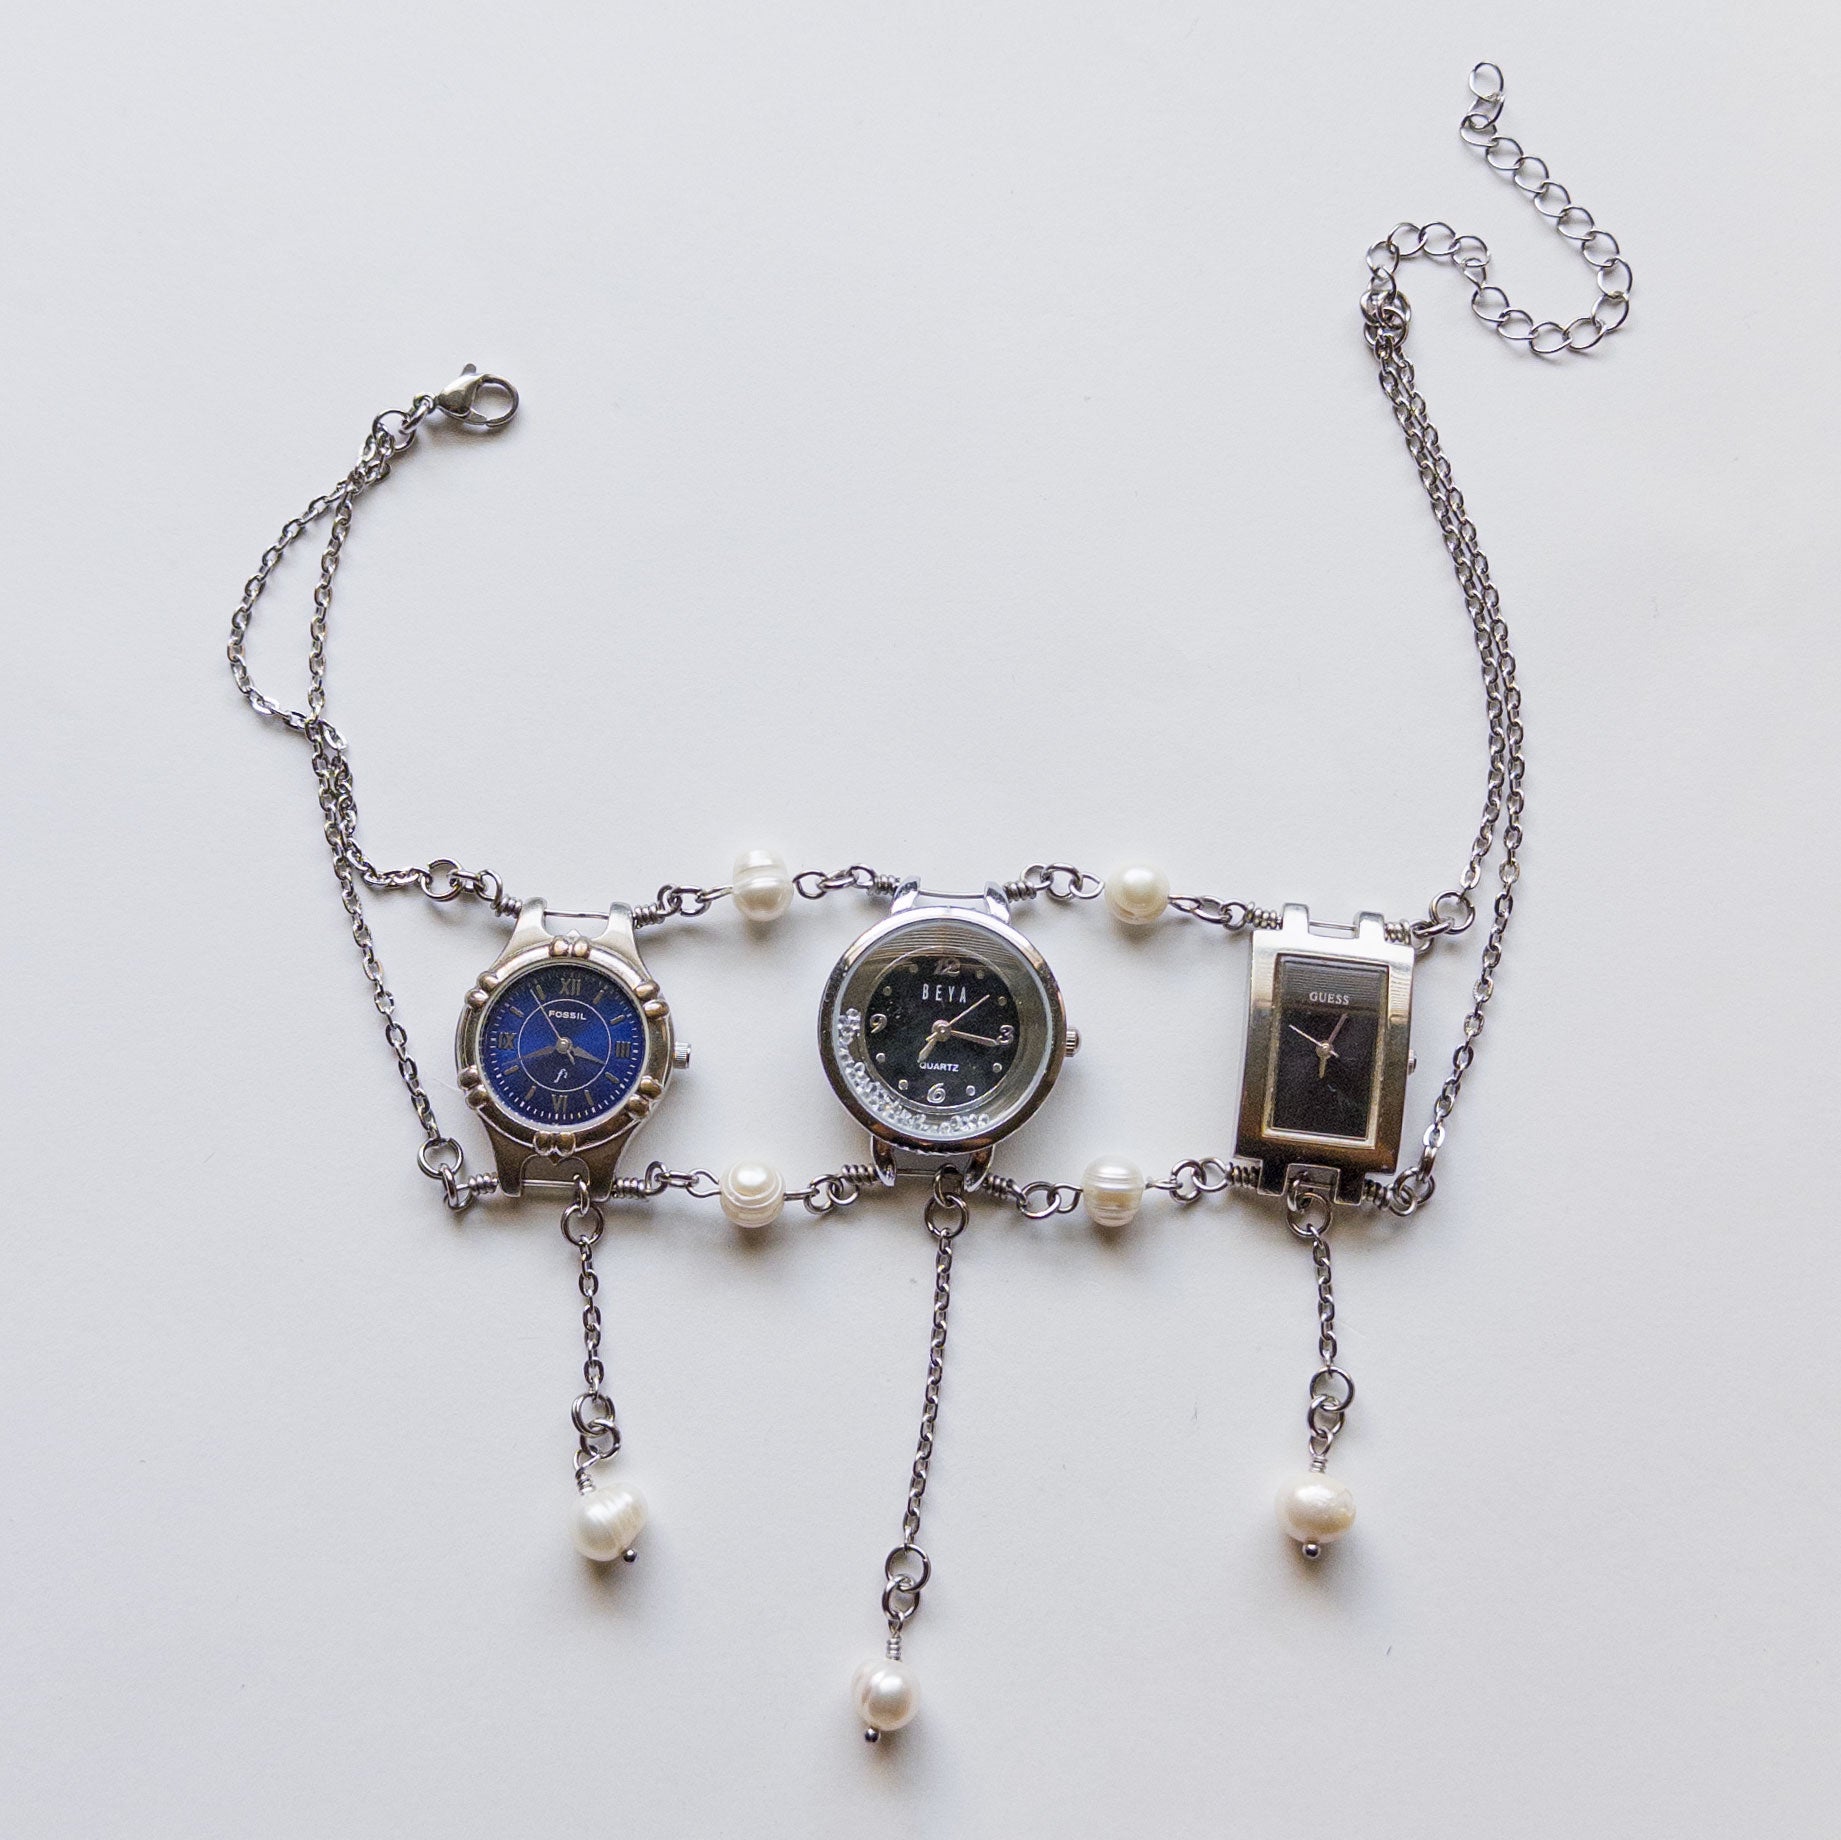 upcycled 3 vintage watch necklace choker stainless steel silver time piece clock classy elegant punk subversive accessories diy avant garde sustainable jewelry fashion futuristic  freshwater pearls dangly black blue